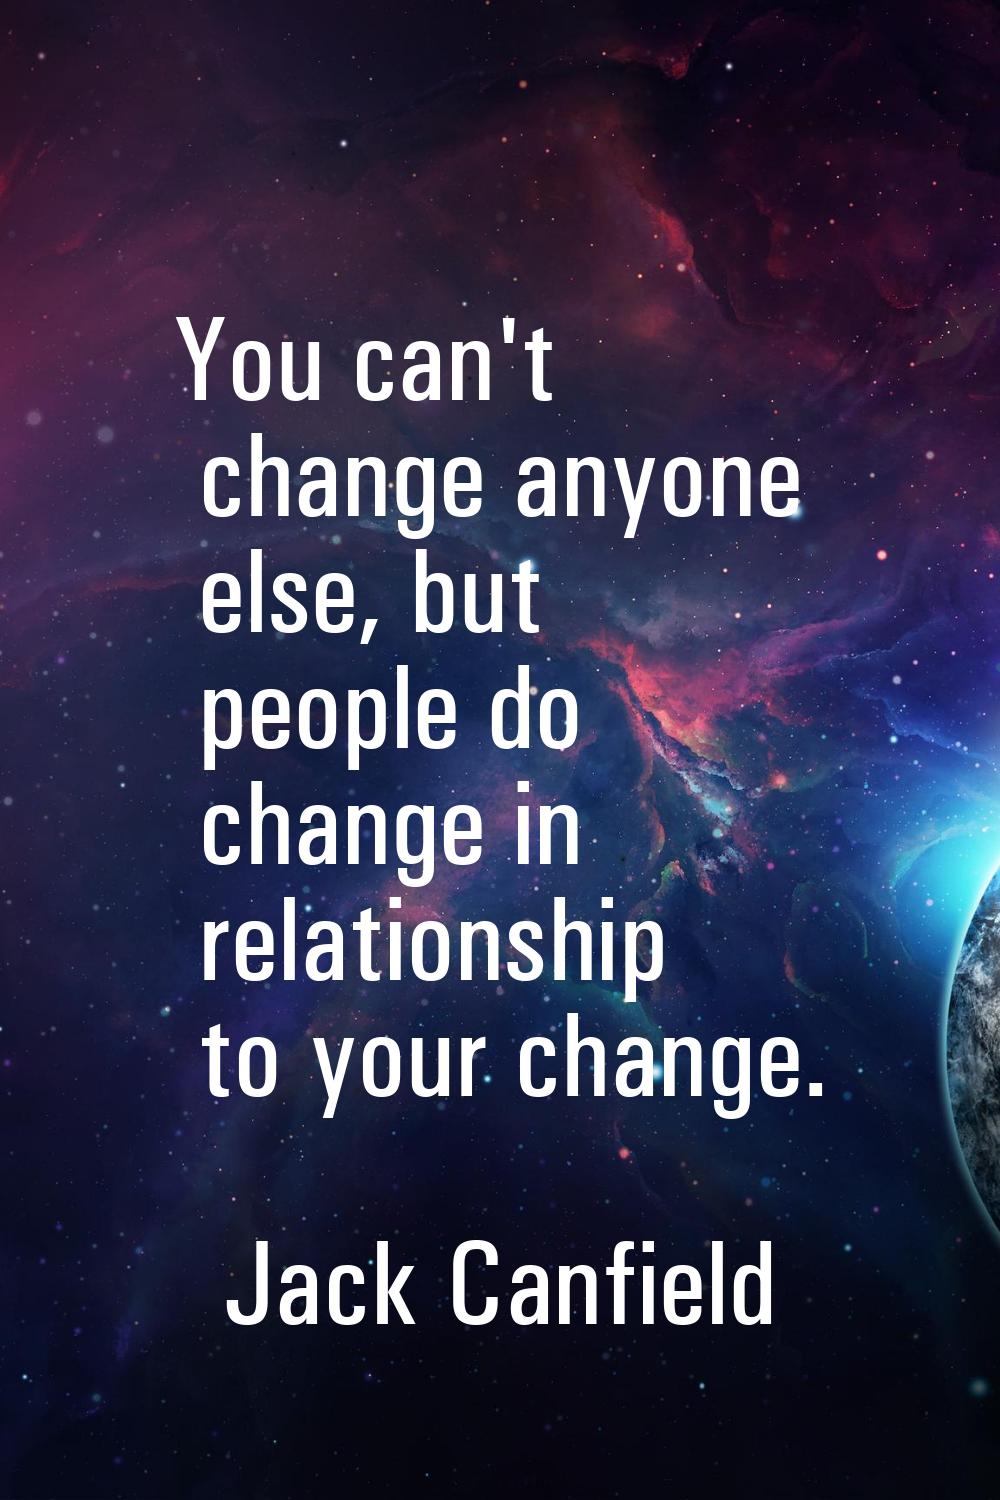 You can't change anyone else, but people do change in relationship to your change.